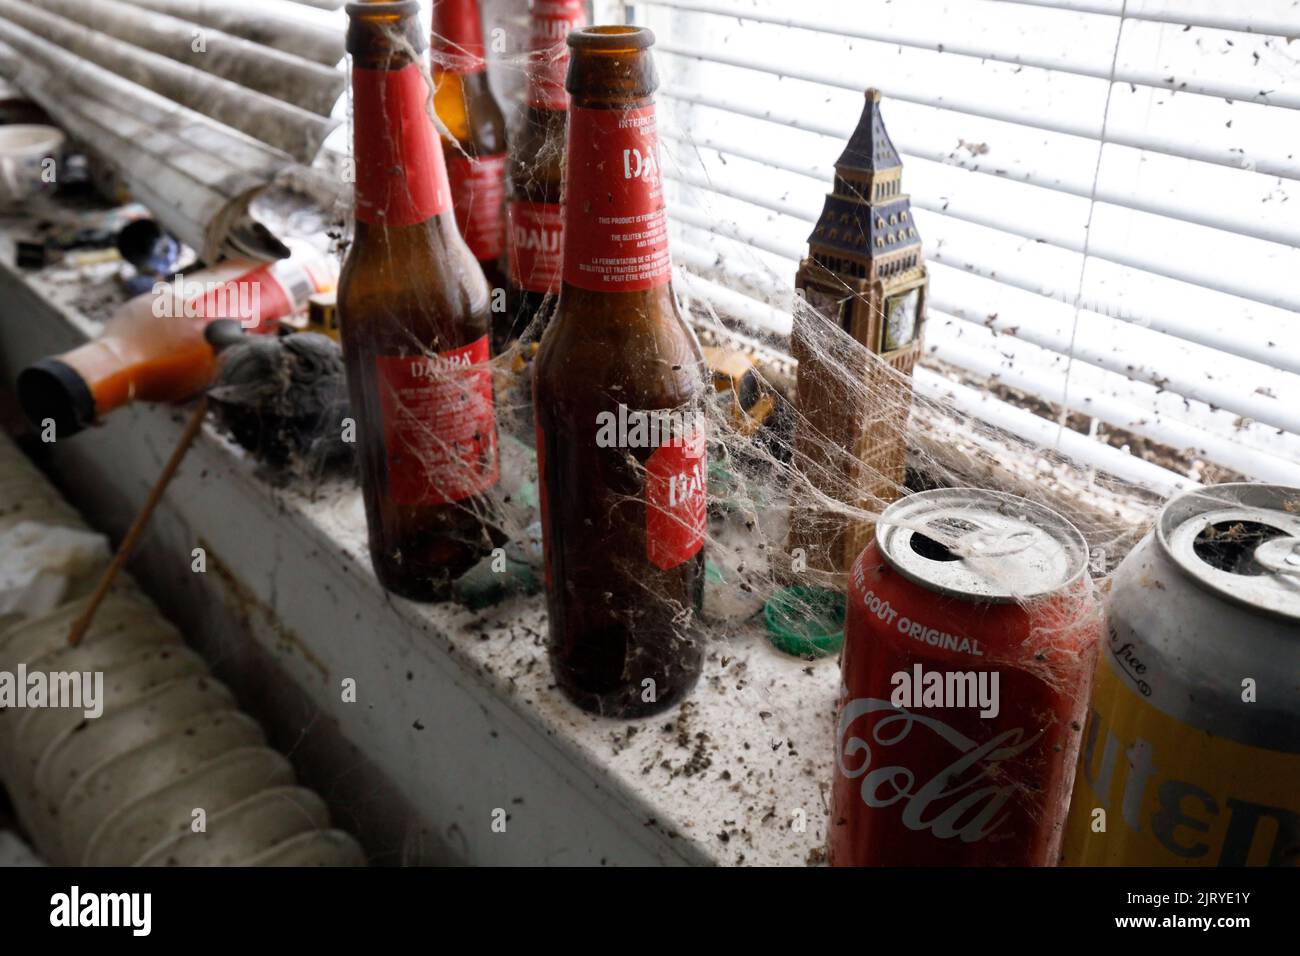 Cobwebs and dead bugs collecting on empty beer bottles and cans on a window sill. This building has since been demolished. Stock Photo